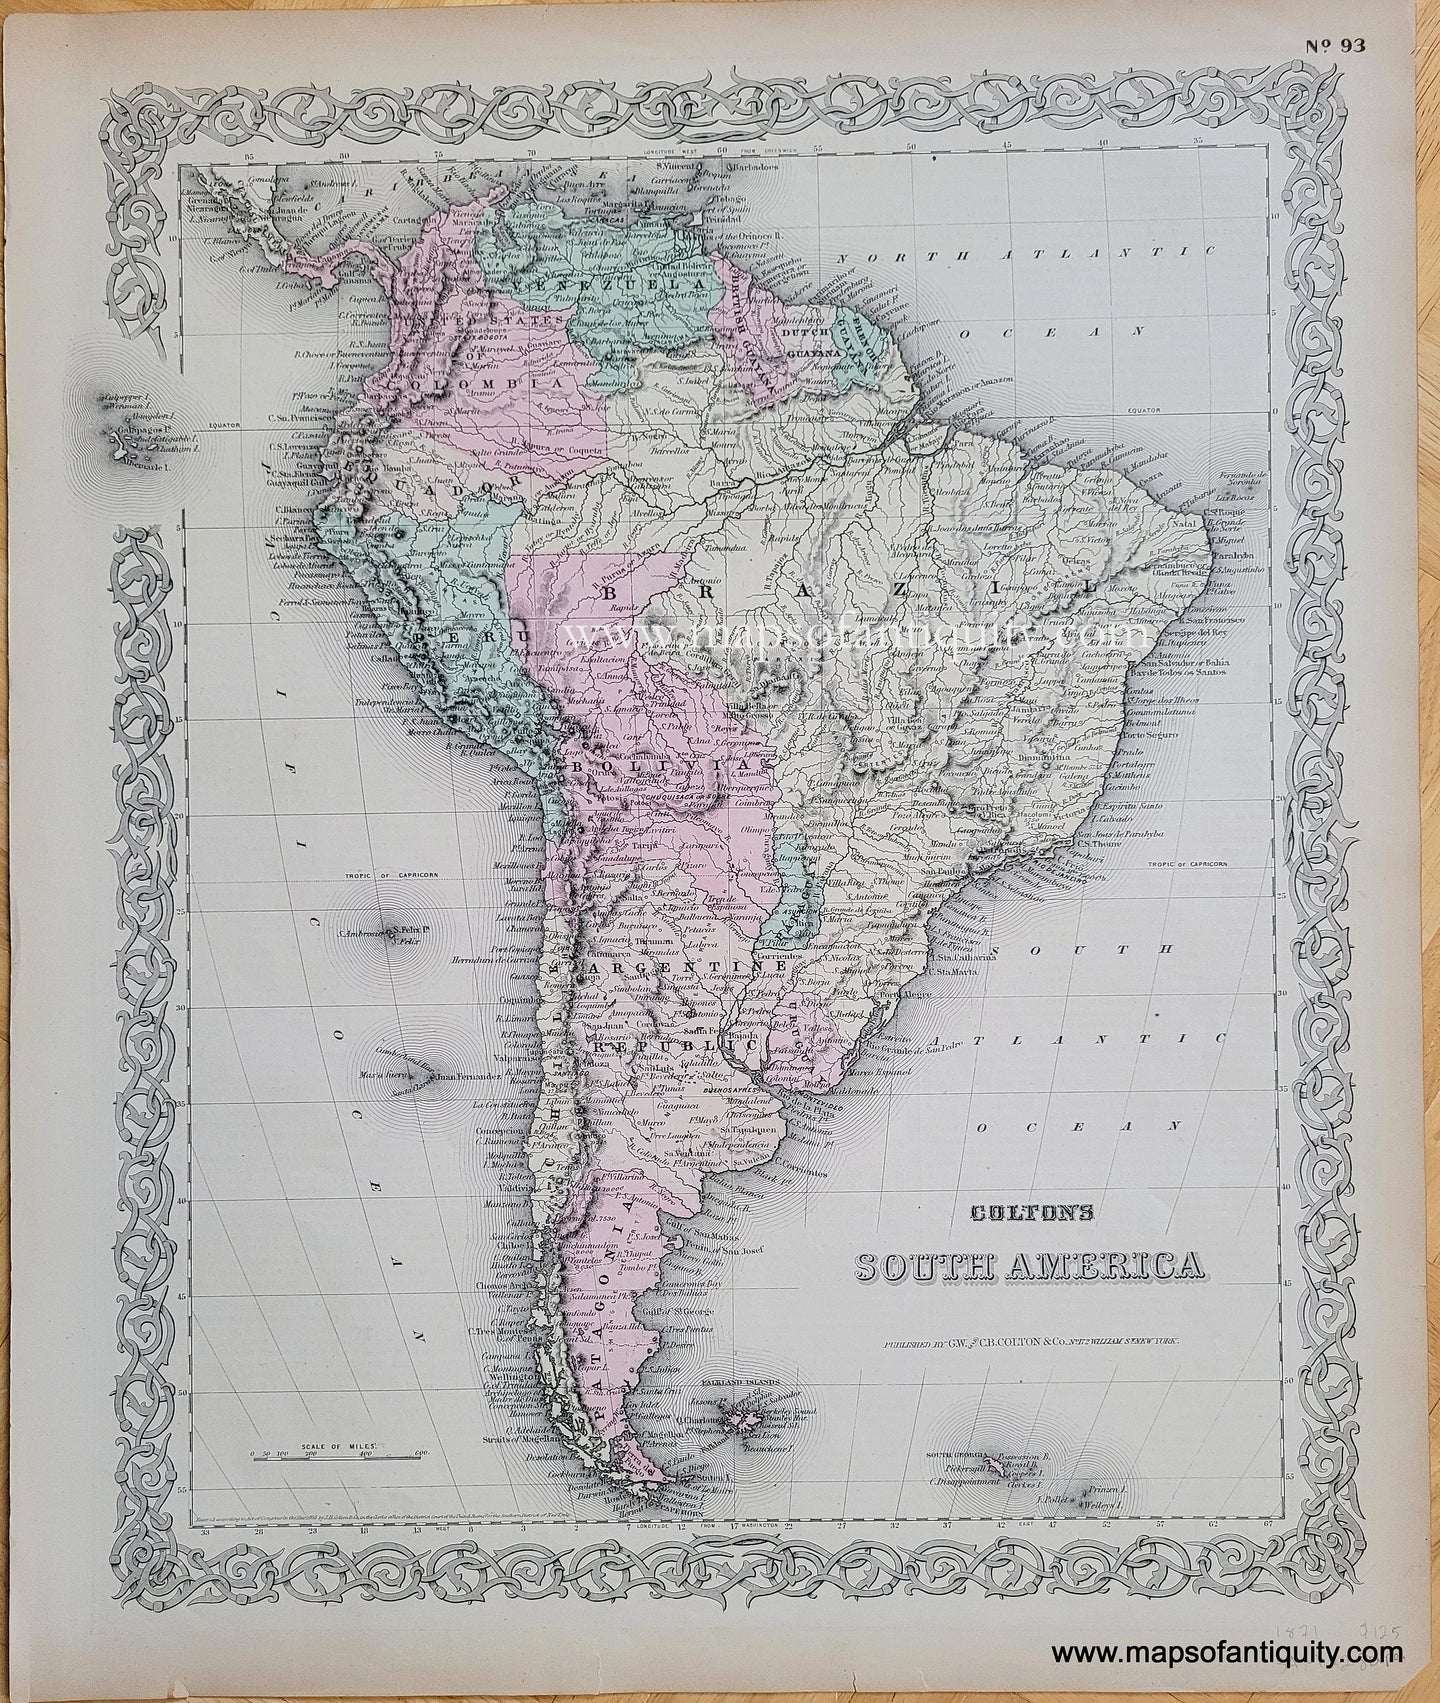 Antique-Hand-Colored-Map-Colton's-South-America-South-America--1871-Colton-Maps-Of-Antiquity